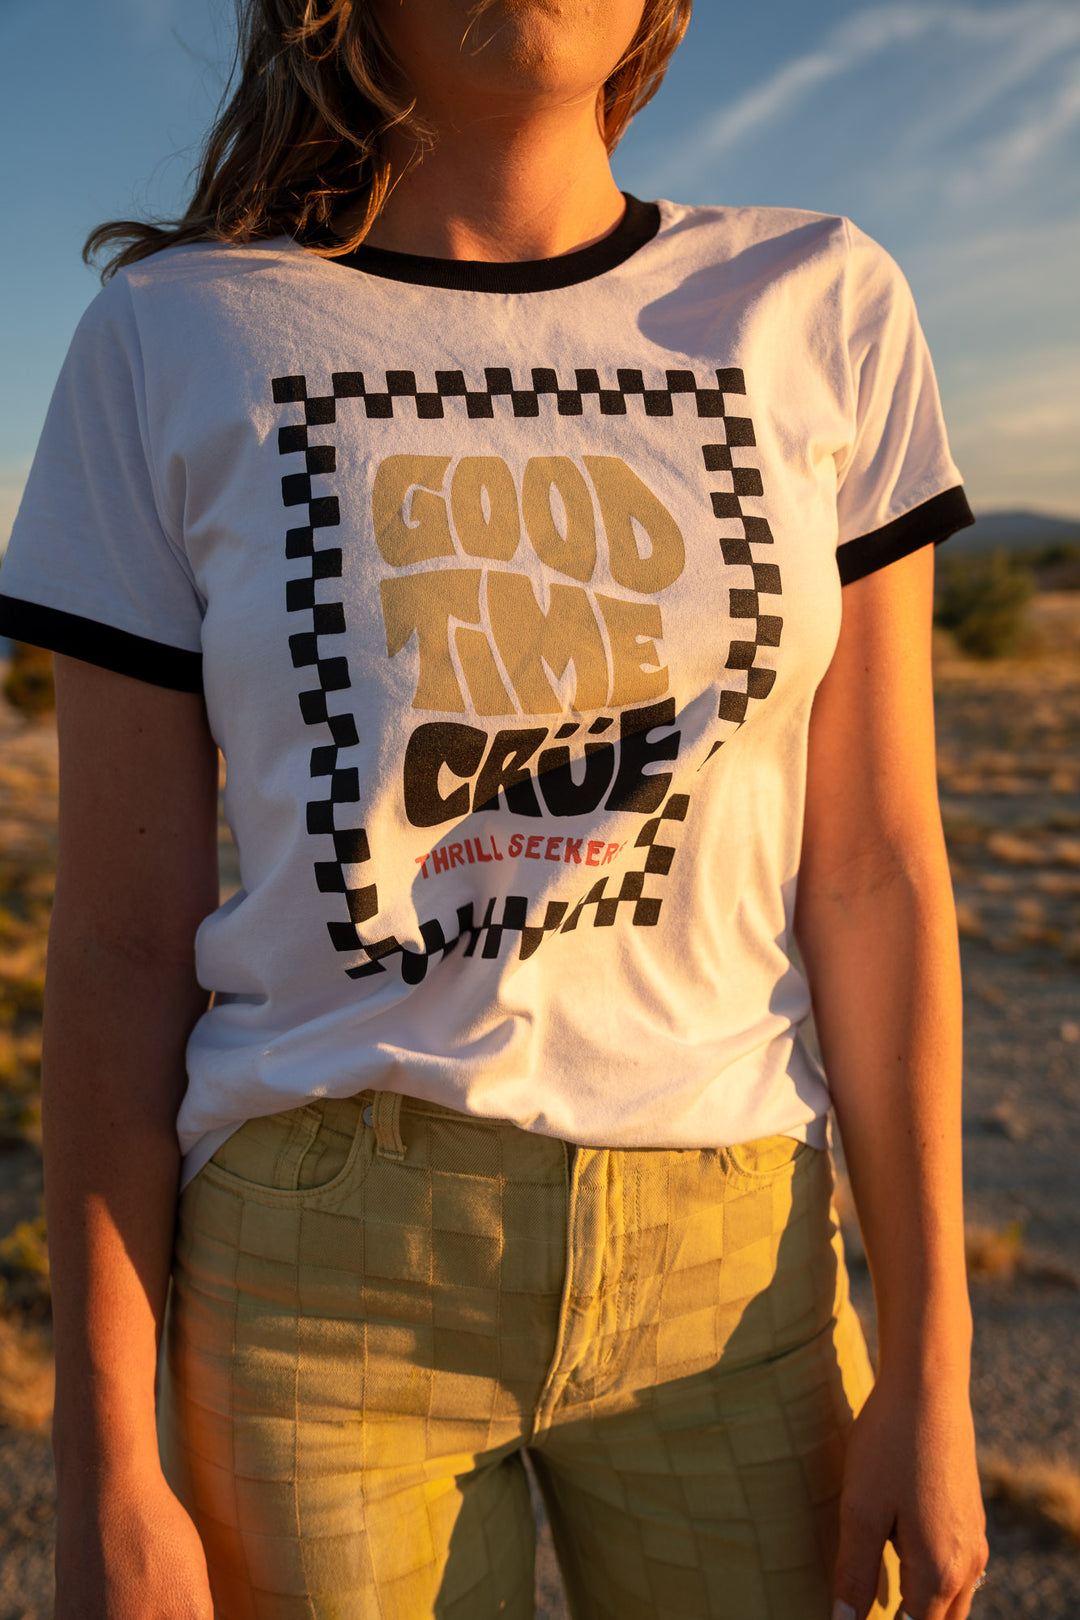 Thrill Seekers Good Time Crüe² Babes Tee White